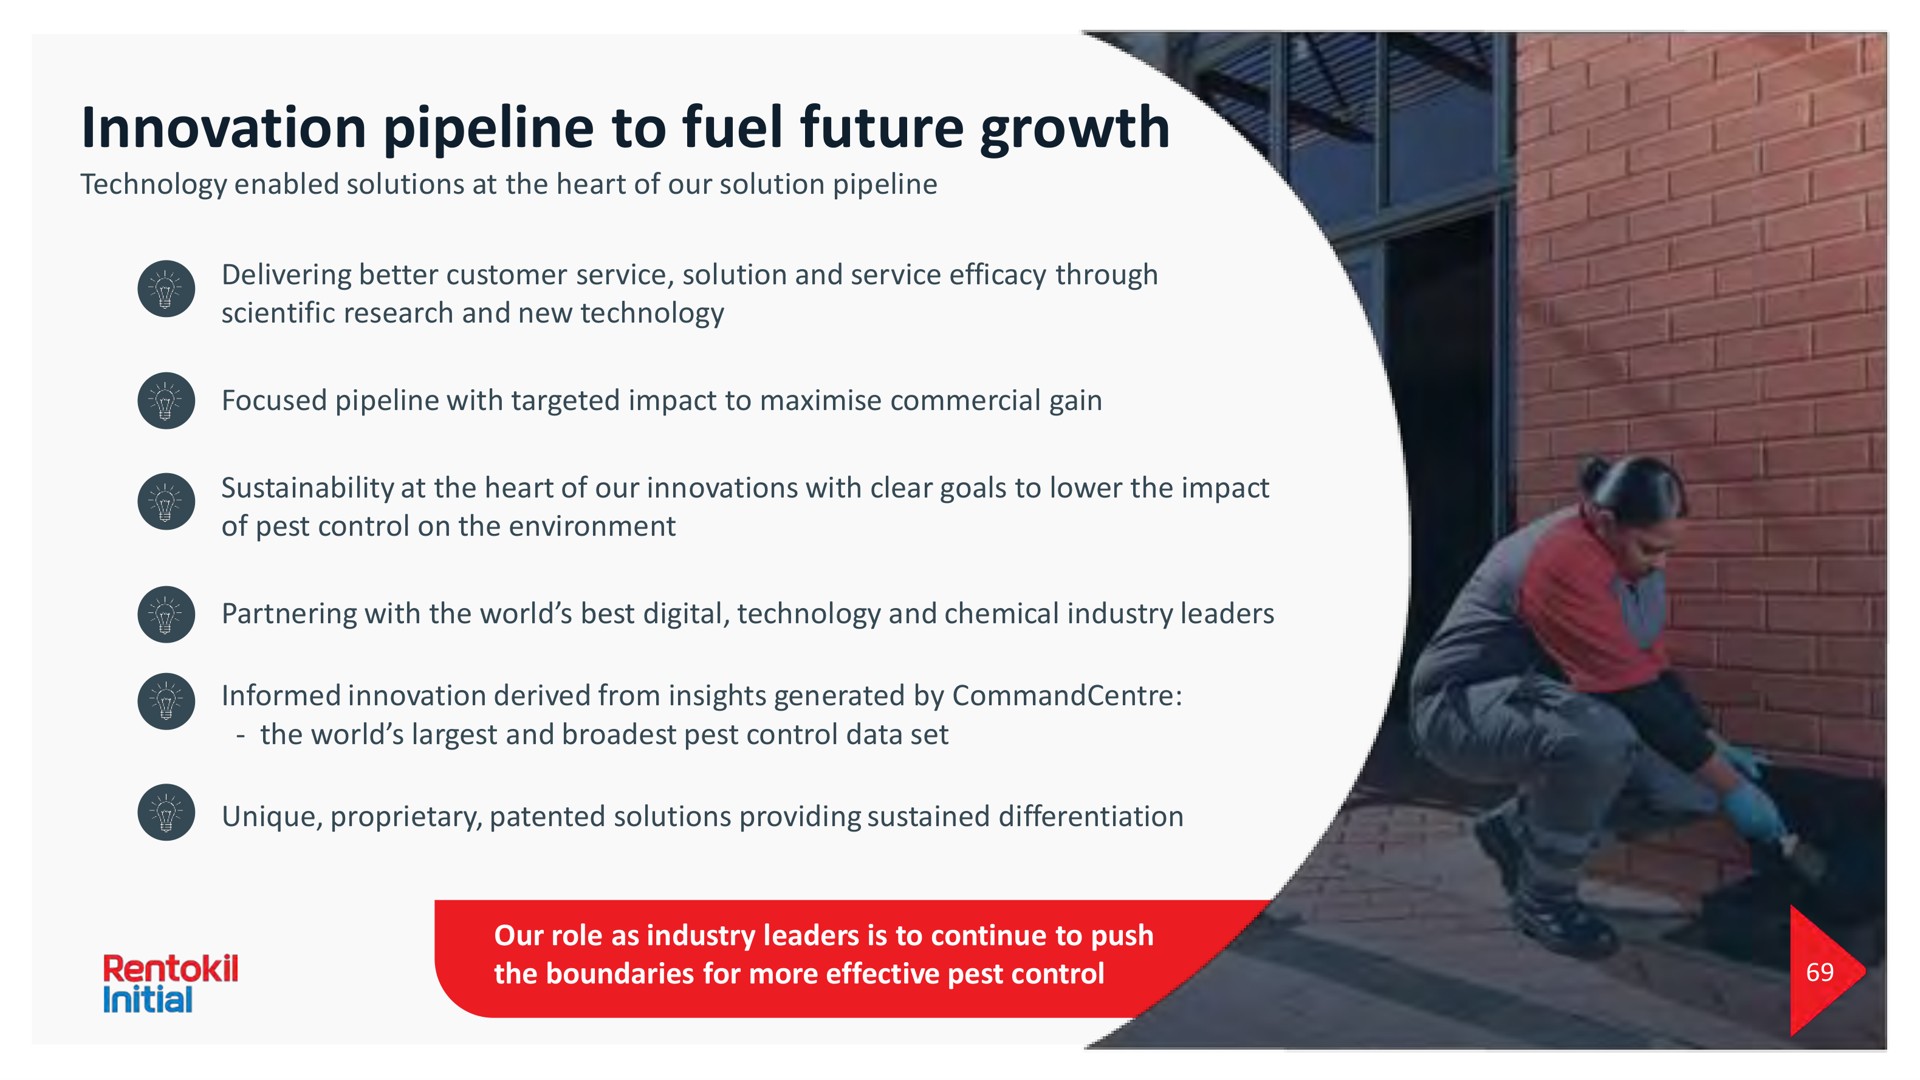 innovation pipeline to fuel future growth | Rentokil Initial